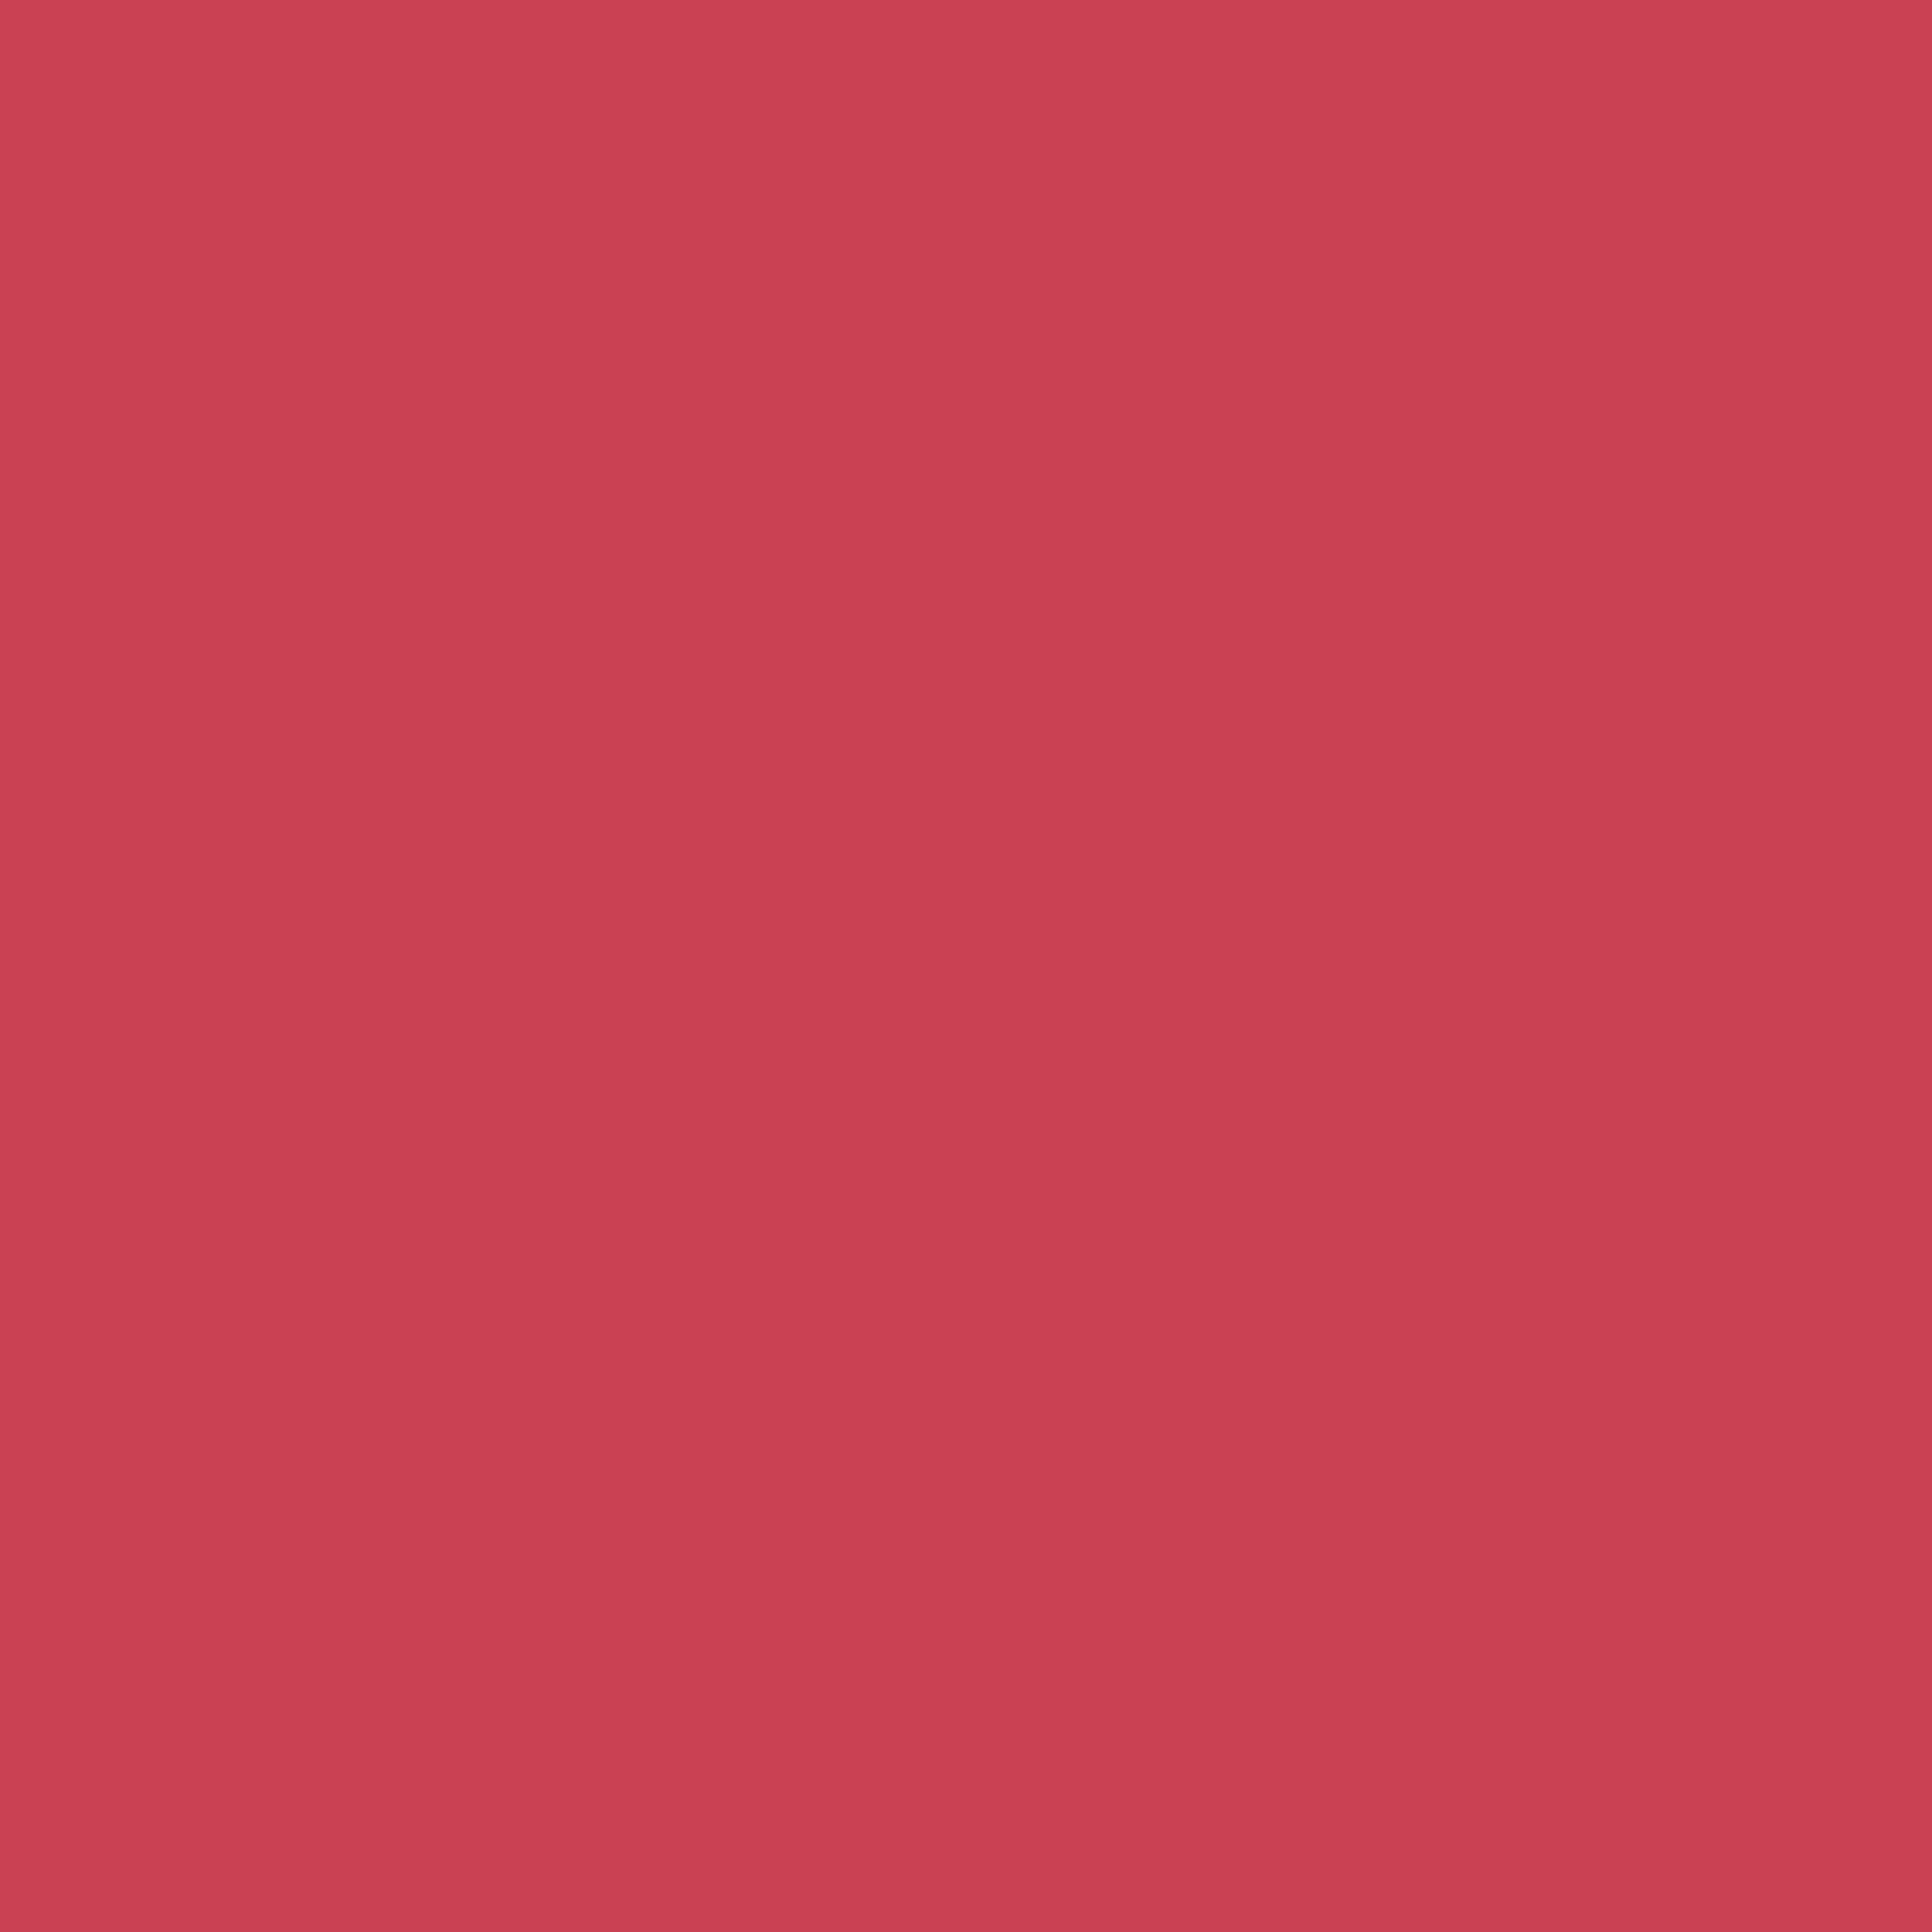 3600x3600 Brick Red Solid Color Background